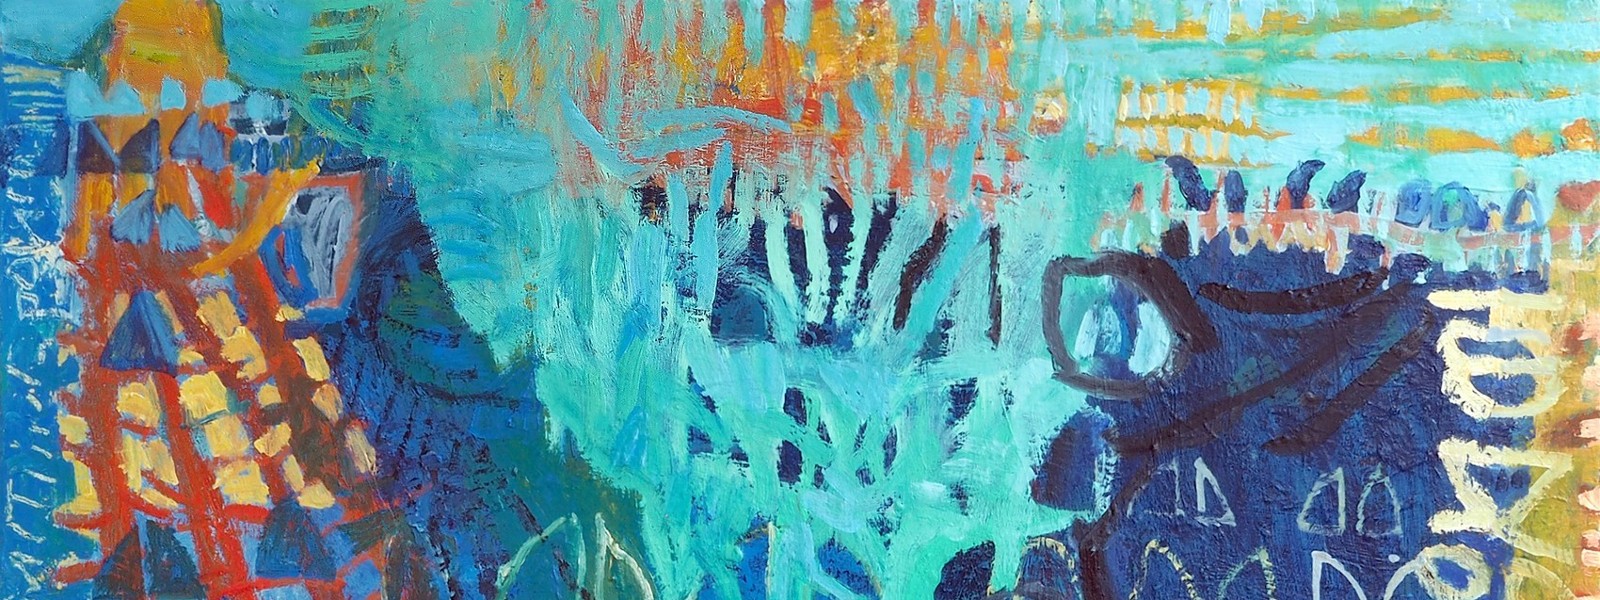 Annual Members & Friends Exhibition (Image: Catherine Weld, The Garden (detail), oil on canvas)